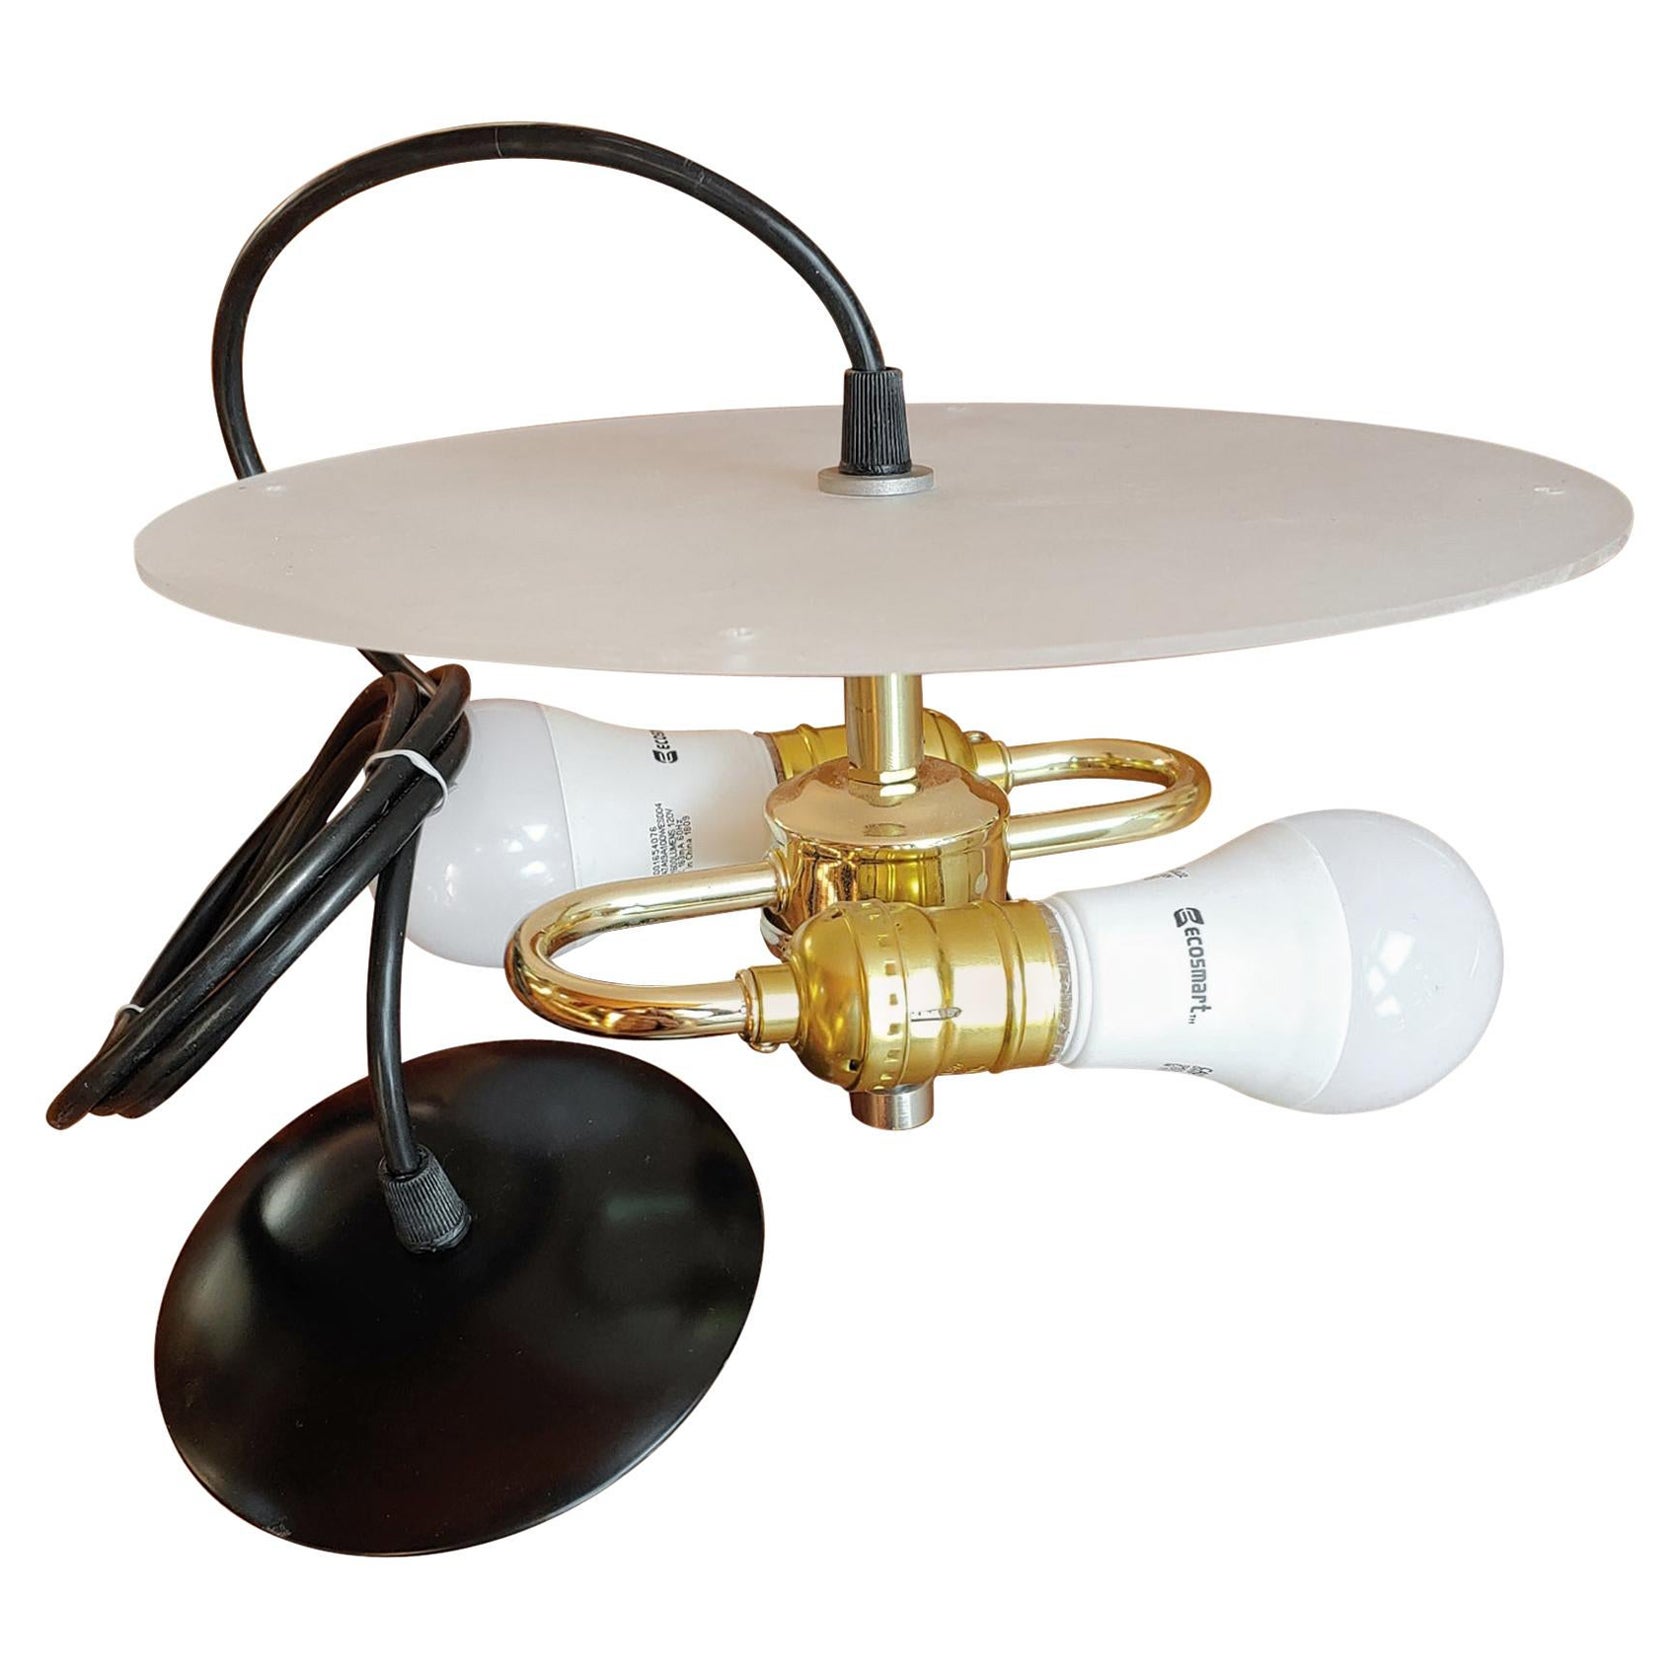 Two Bulb Fixture in White, Black, Bronze or Satin Nickle, Upgrade